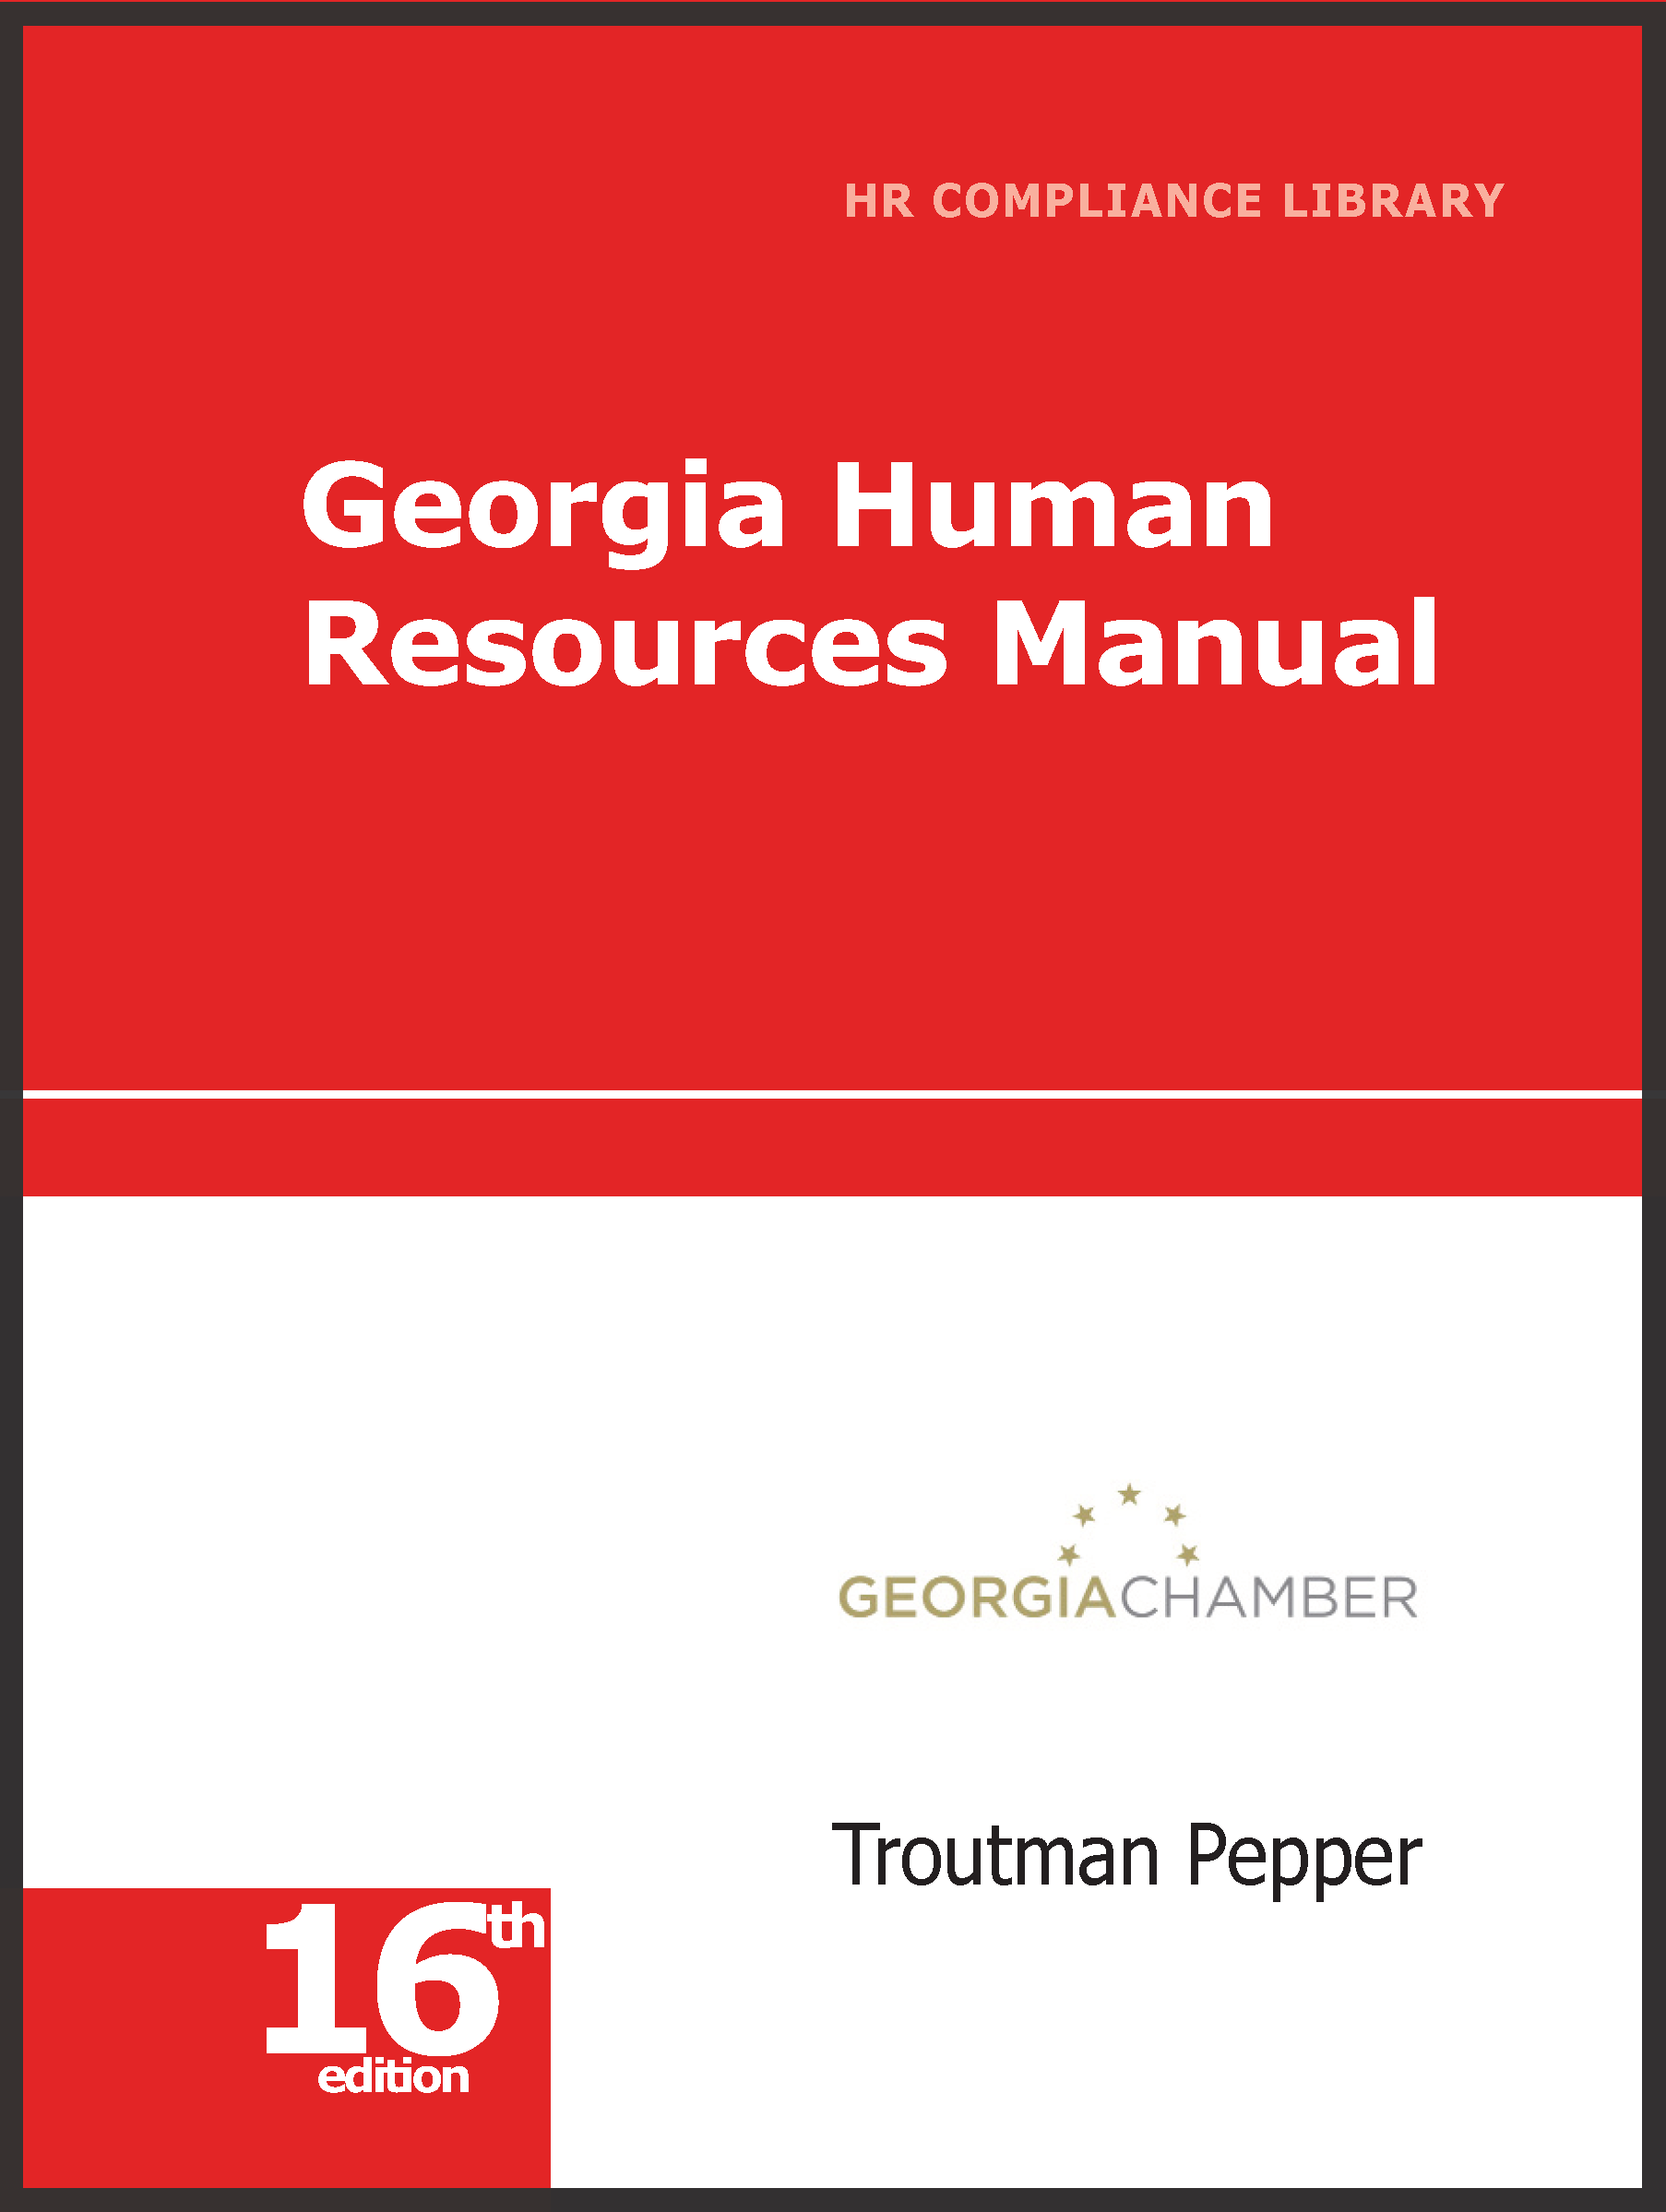 Georgia 7-Day Free Trial employment law image, remote work, labor laws, employment laws, right to work, order of protection, minimum wage